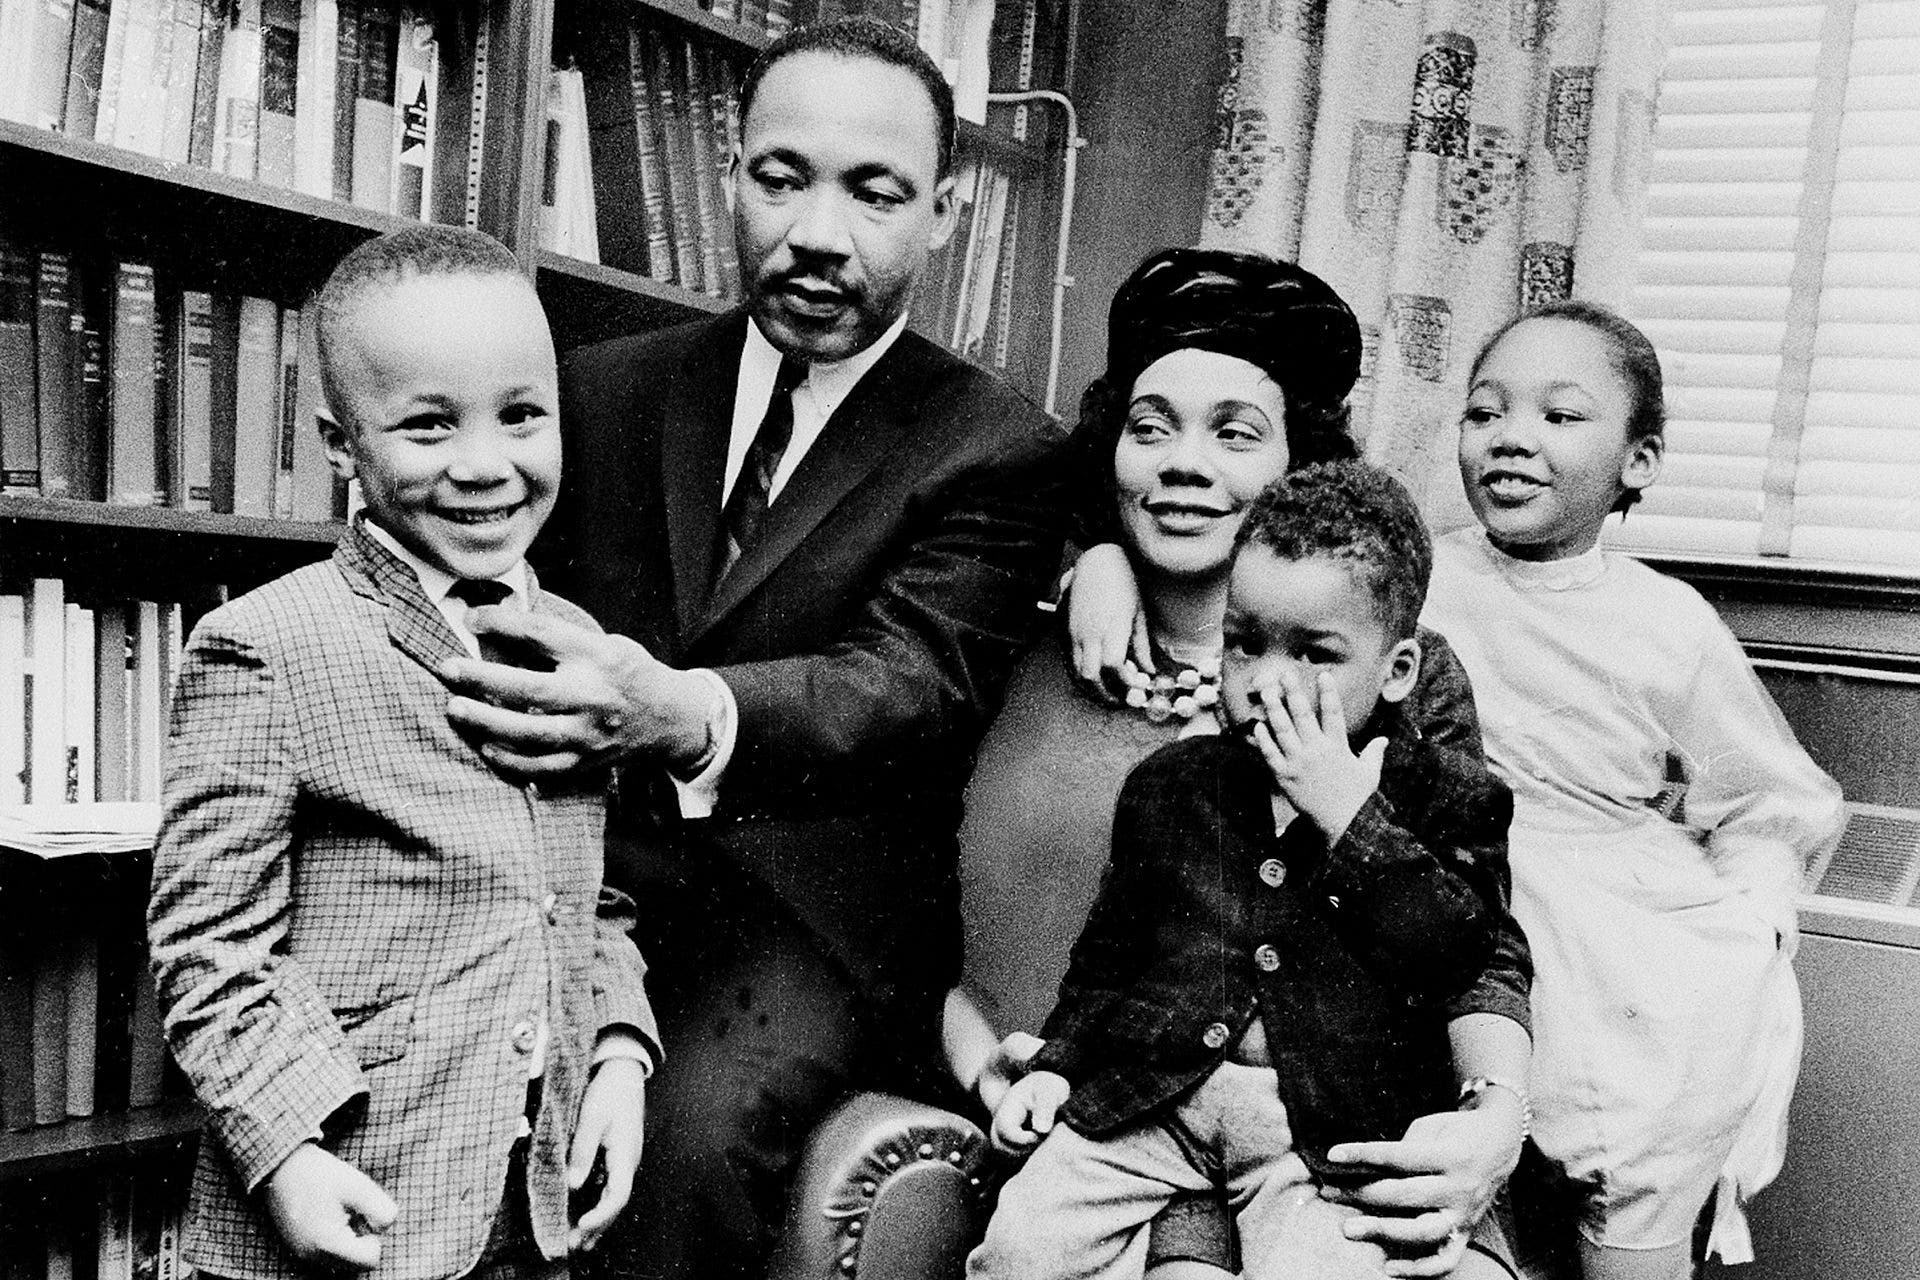 Martin Luther King, Jr.: The life and the legacy